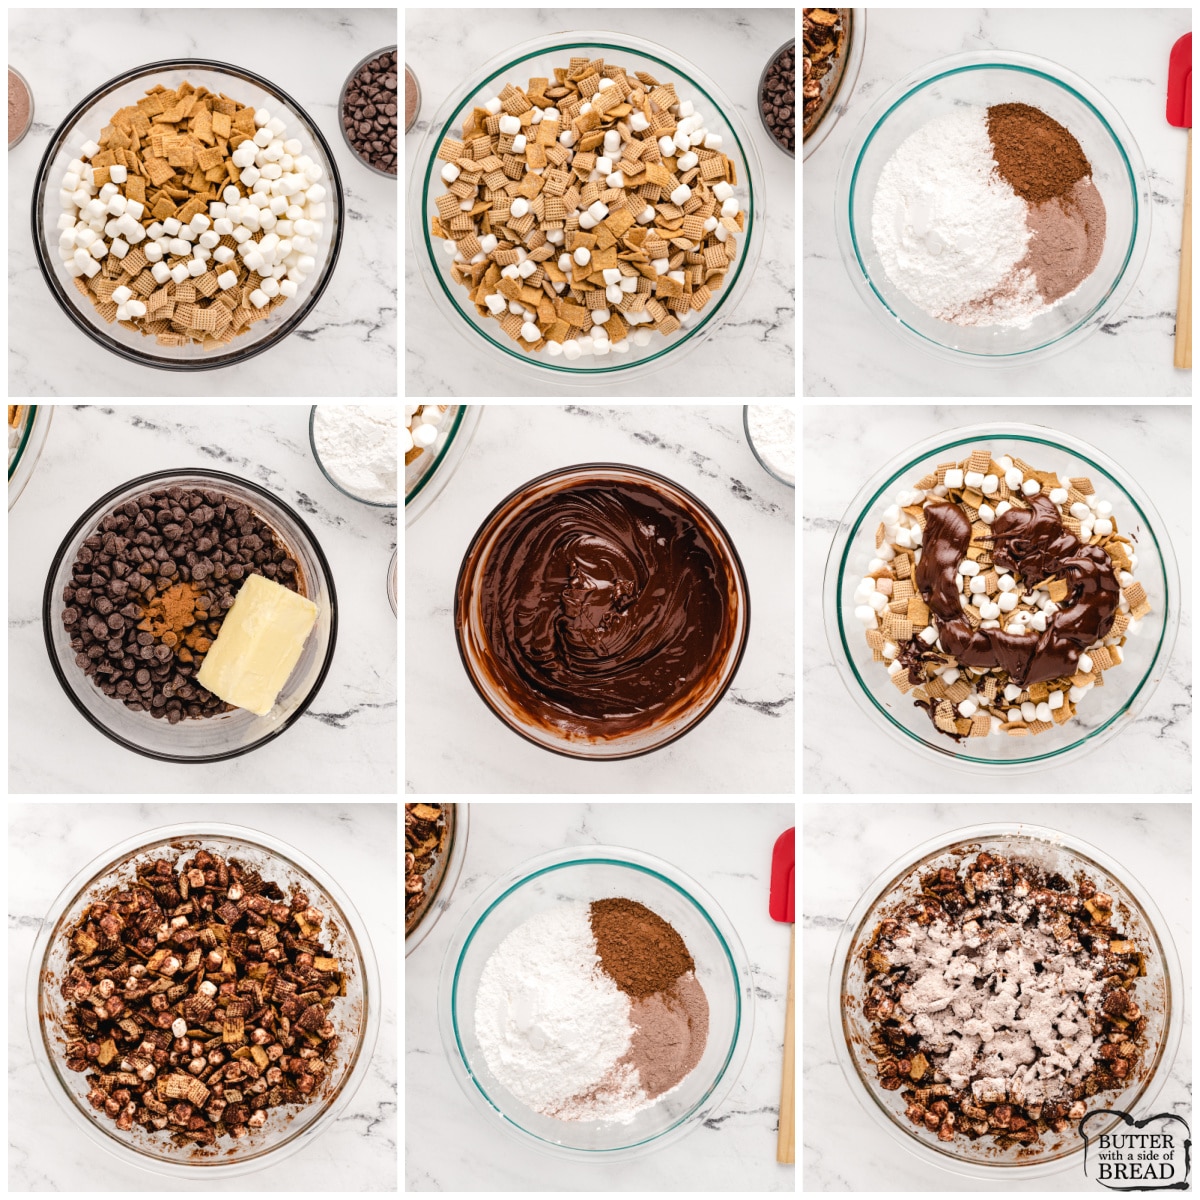 Step by step instructions on how to make Hot Chocolate Snack Mix